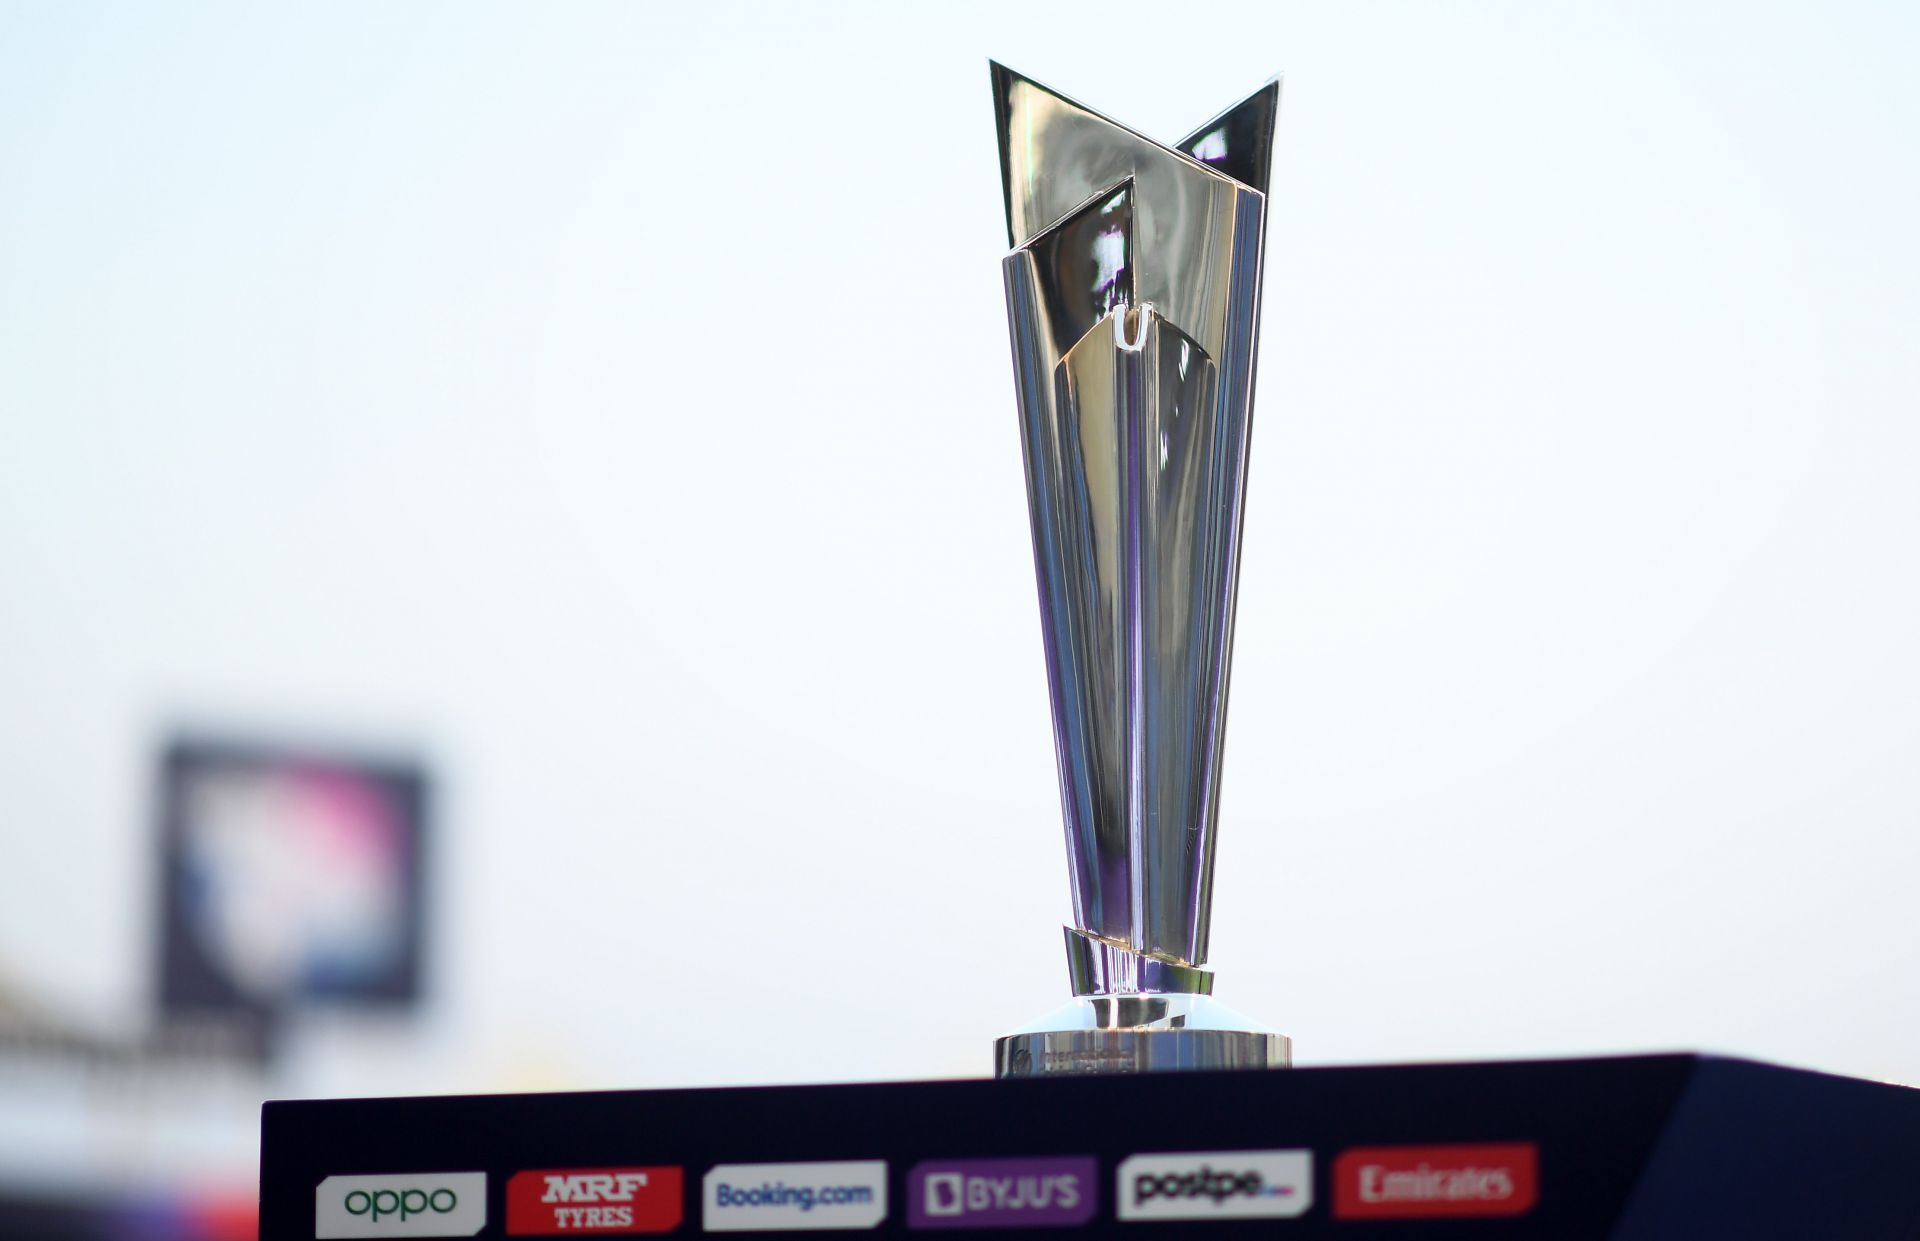 The 2021 edition of the T20 World Cup has entered the knockout stages